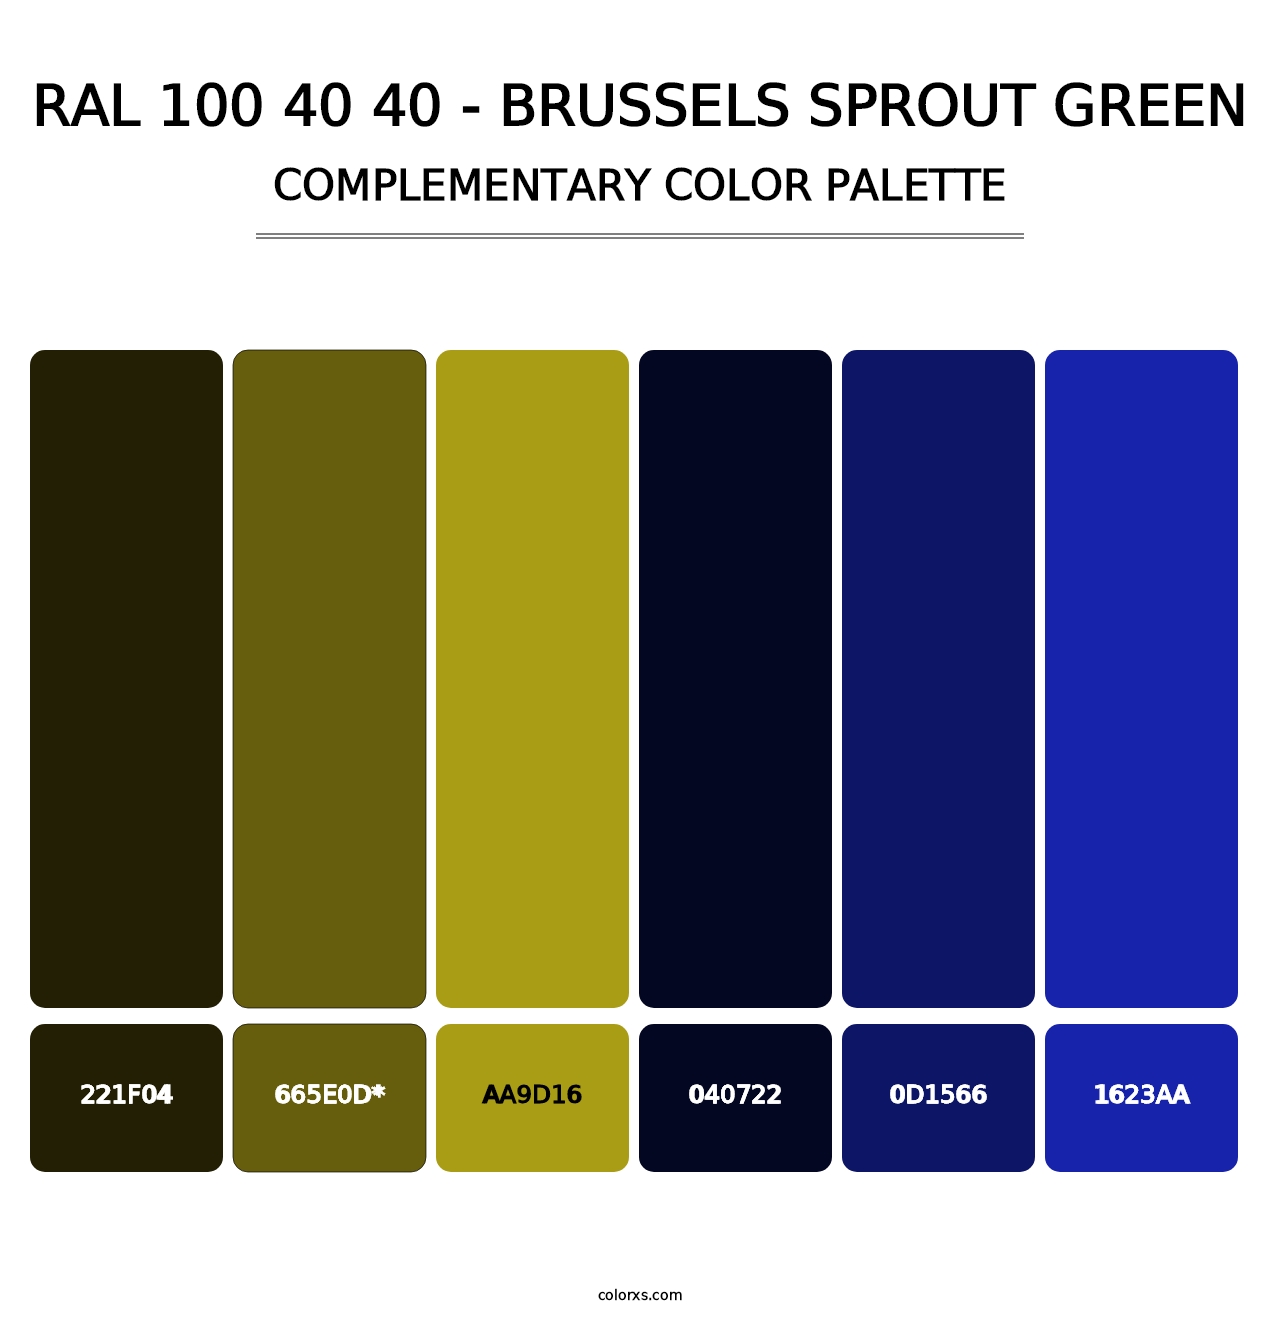 RAL 100 40 40 - Brussels Sprout Green - Complementary Color Palette